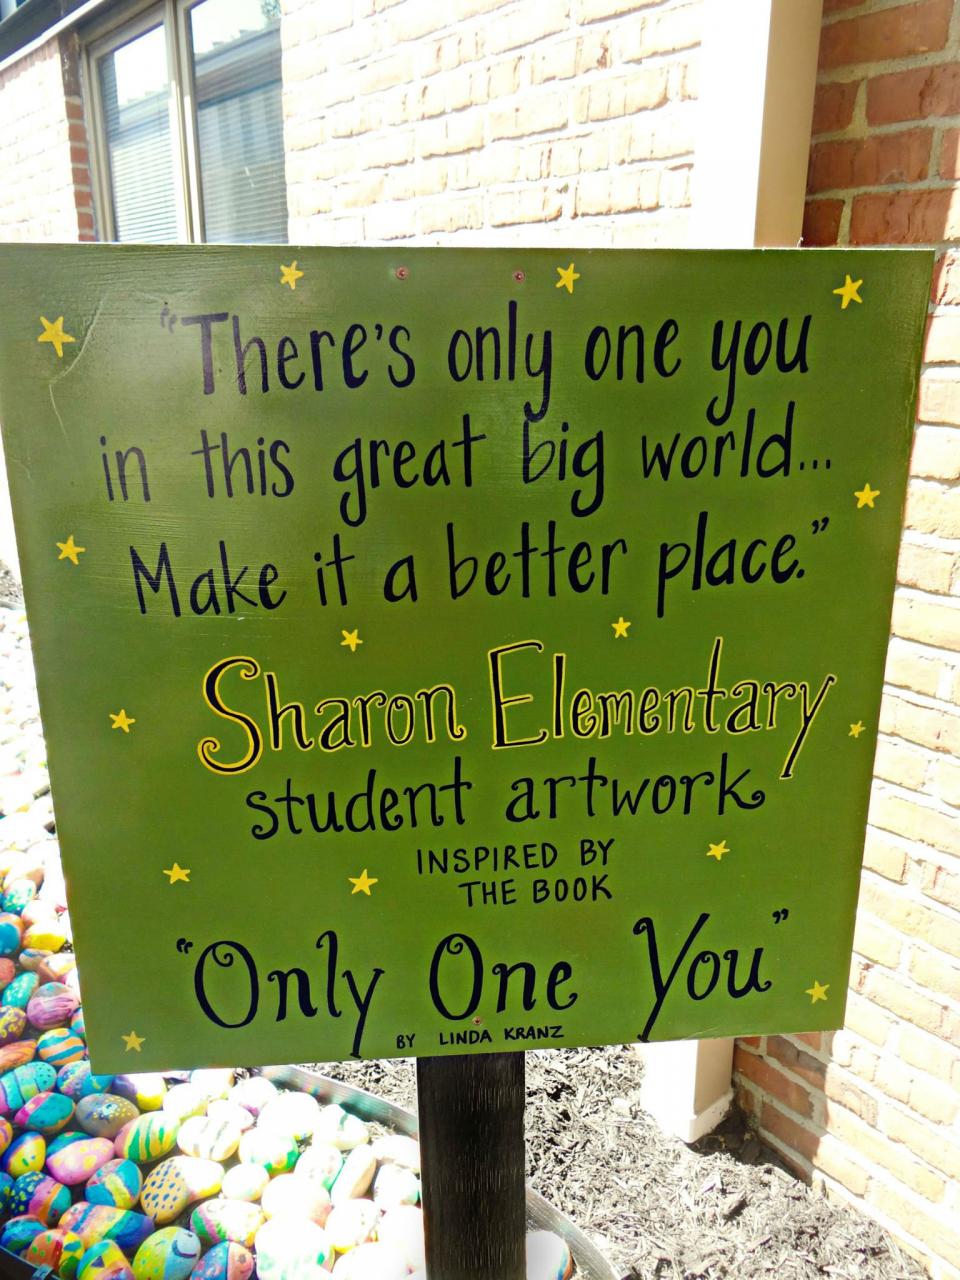 One Rock Per Student Leads to a Beautiful Elementary School Art Project